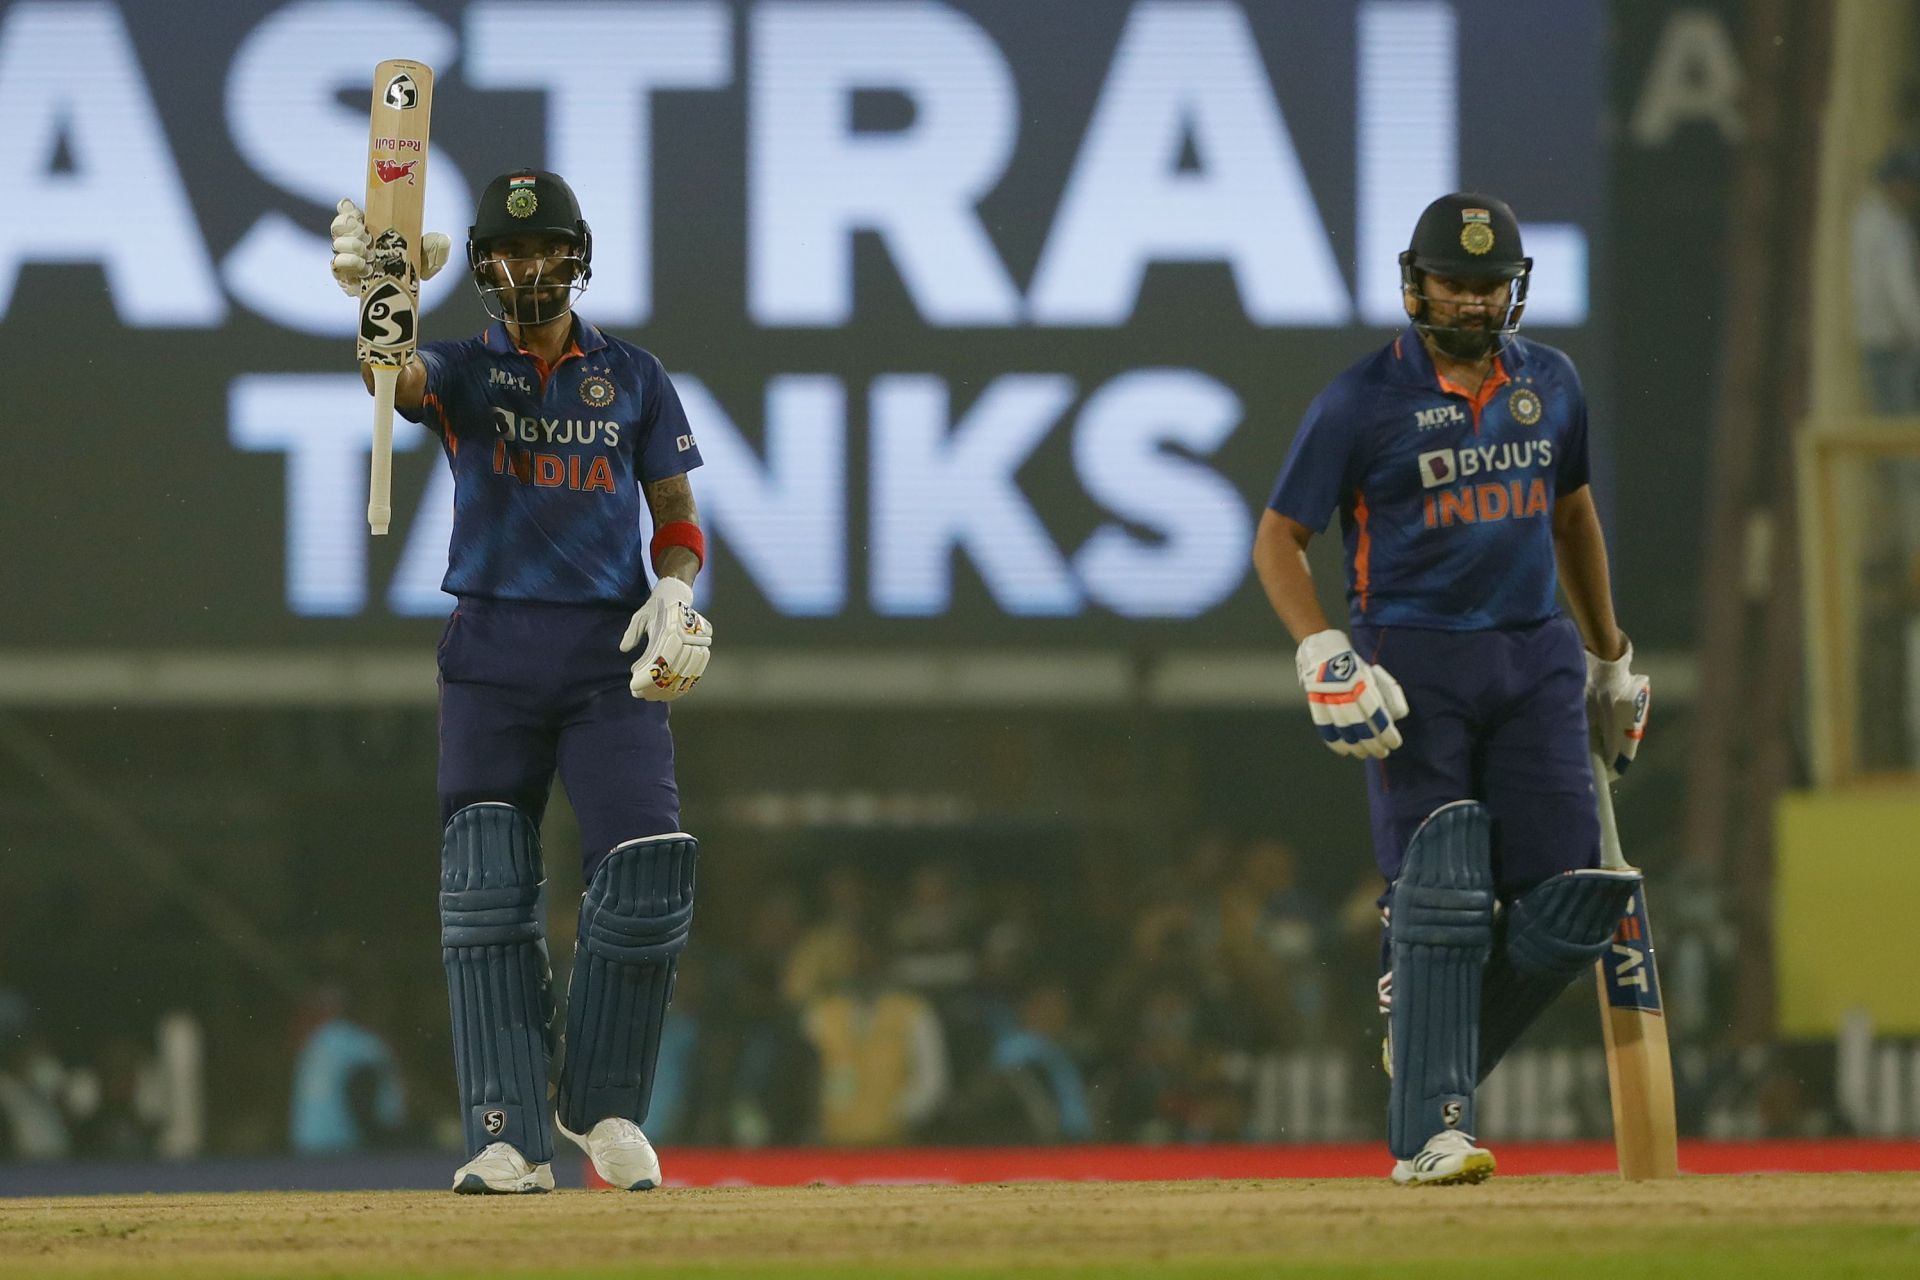 KL Rahul and Rohit Sharma shared 117 runs for the opening wicket in the third T20I against New Zealand (PC: BCCI TV)